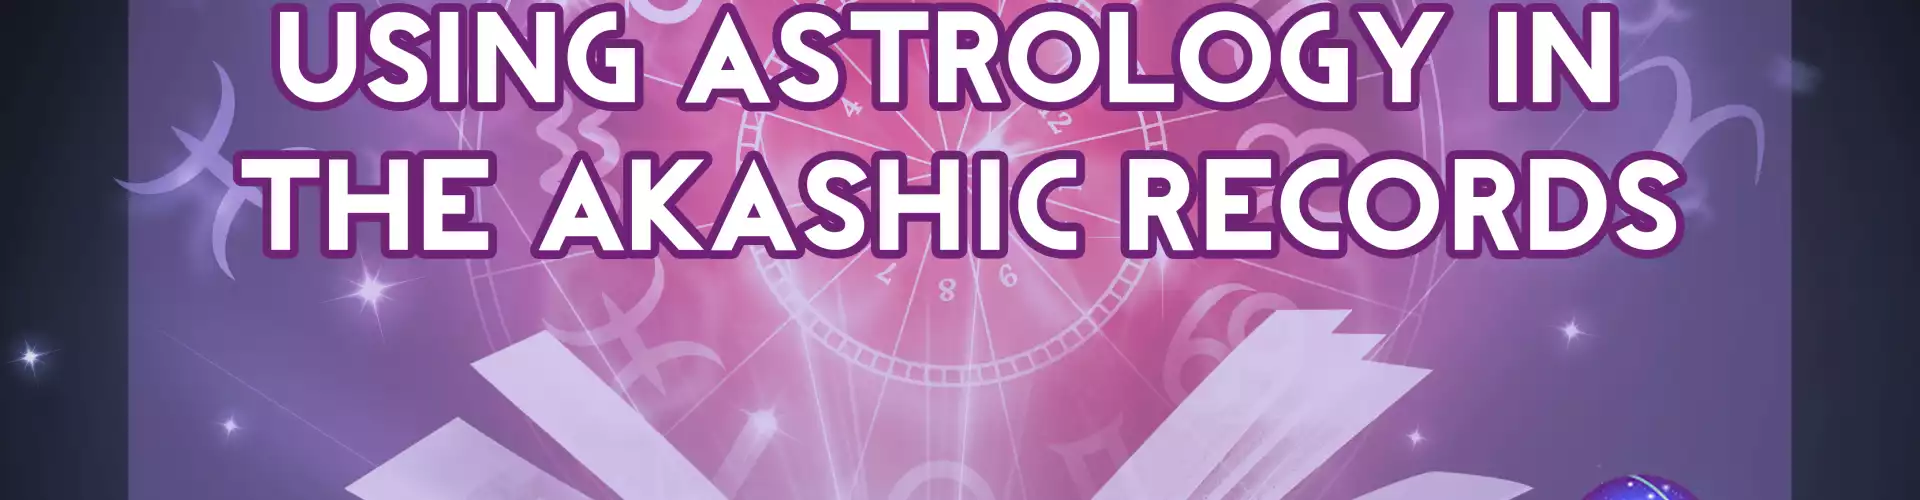 Using Astrology in the Akashic Records